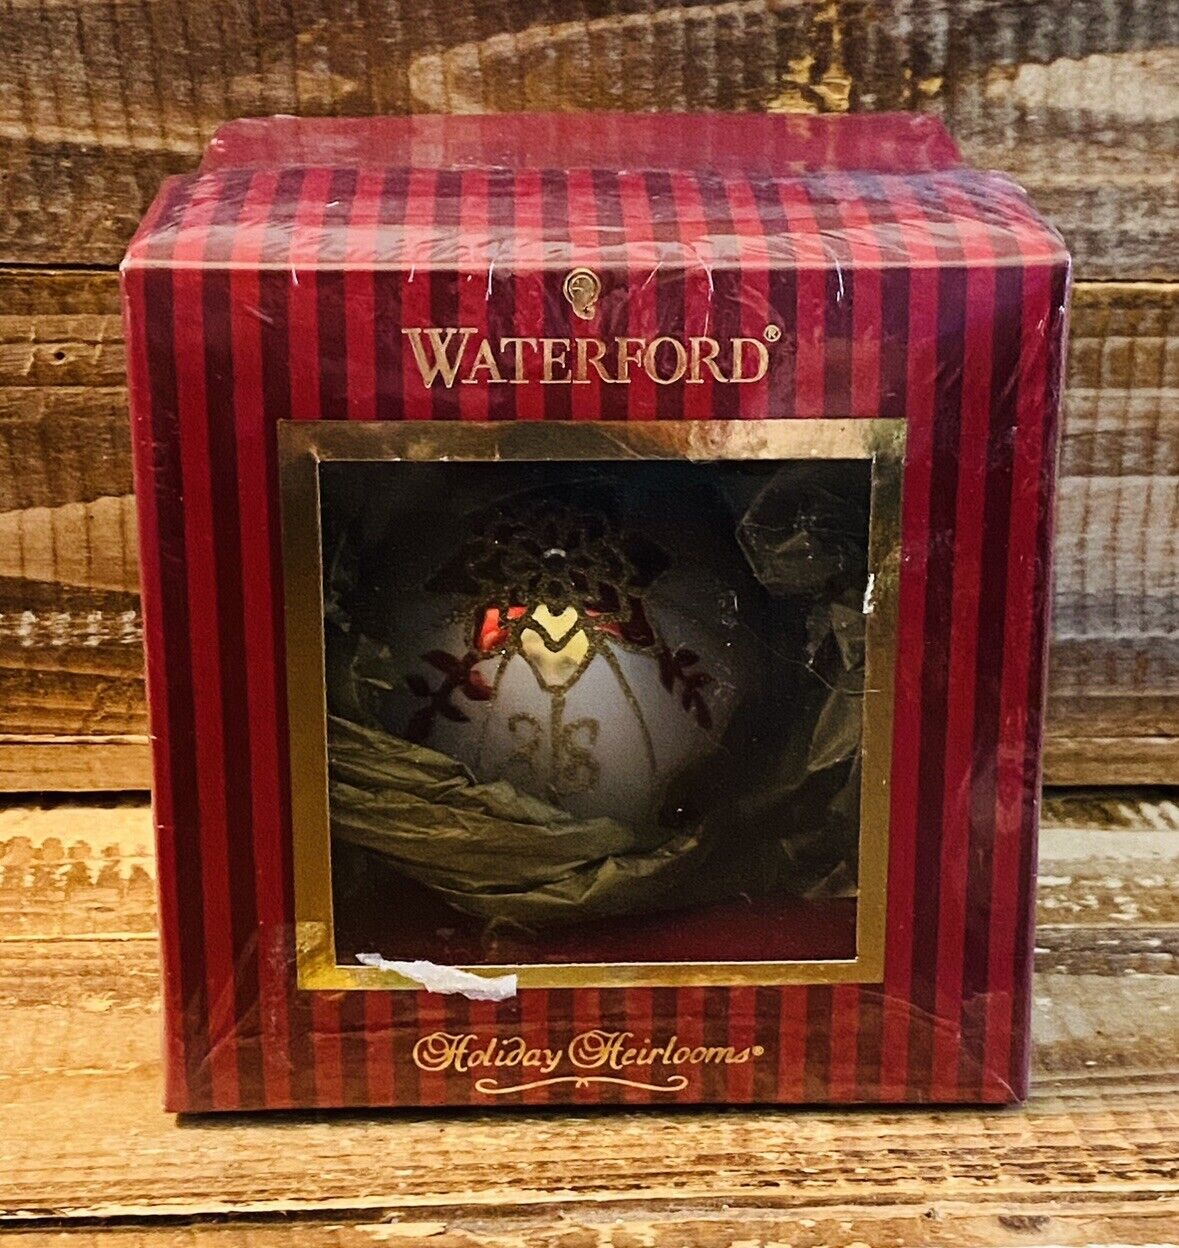 New Sealed Waterford Holiday Heirloom Ornaments Elements Star Ball